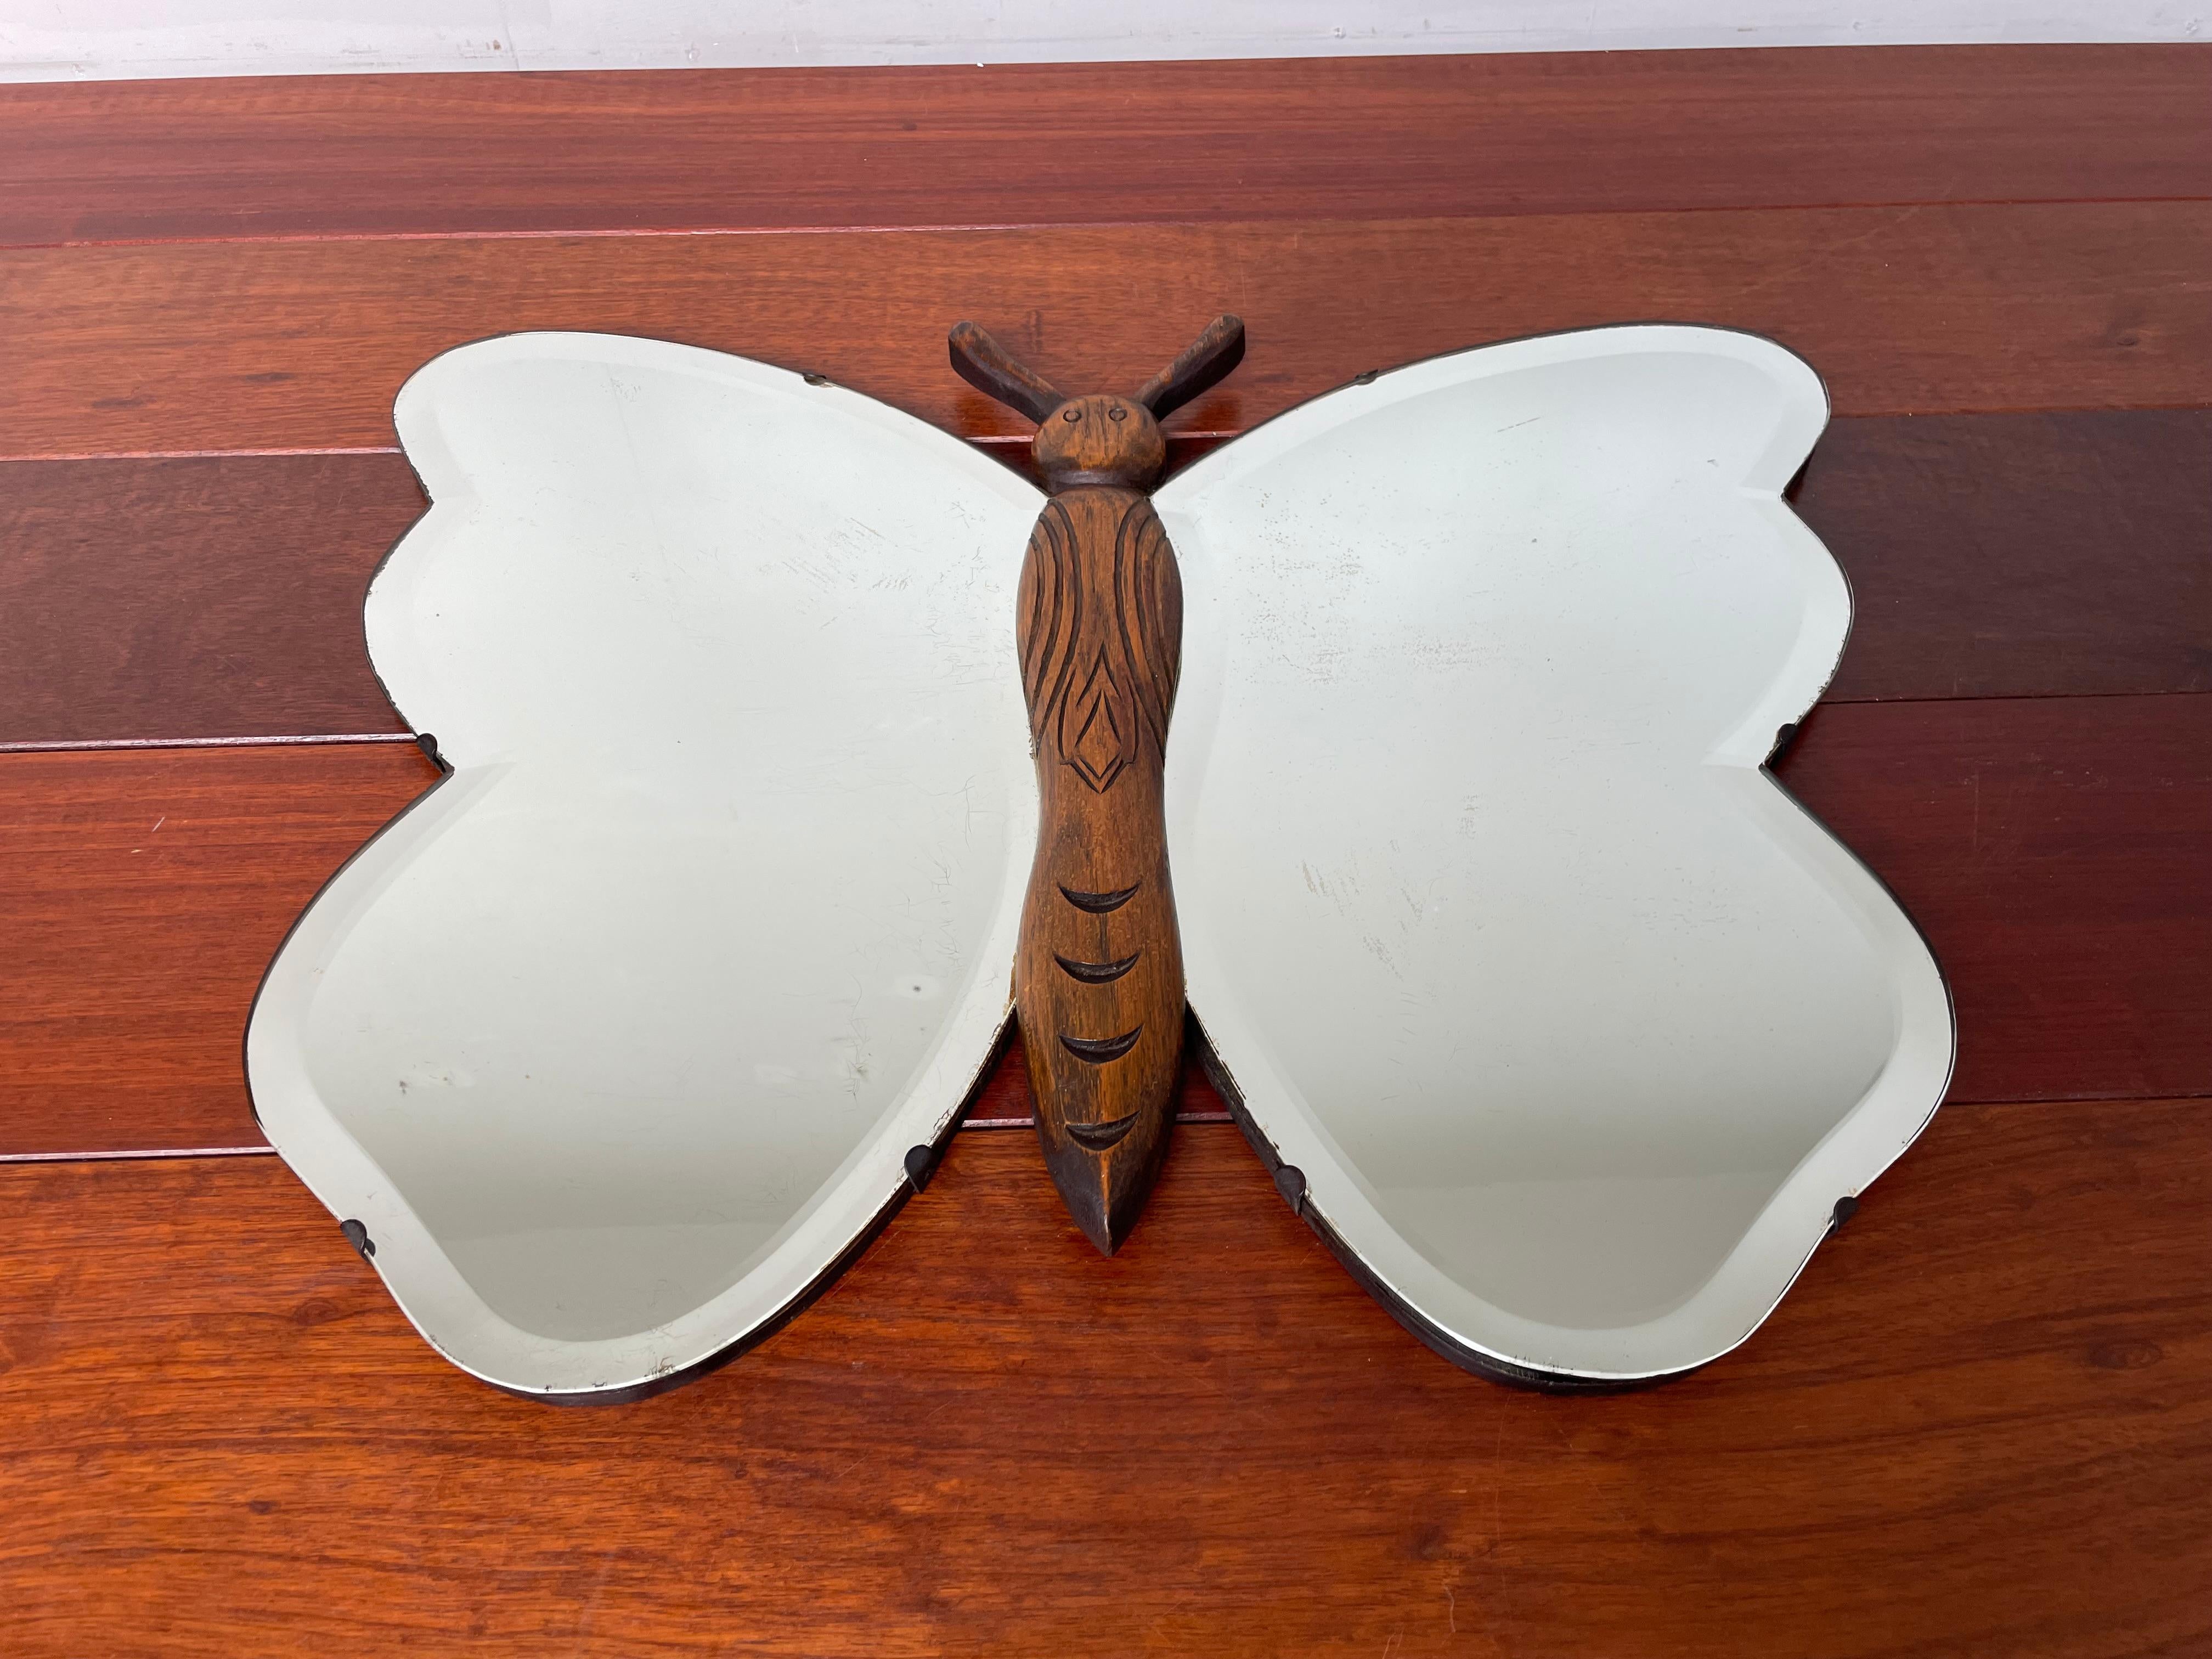 Striking butterfly wall mirror, with an oak body and beveled glass wings.

If you love butterflies and/or if they are meaningful in your life then this wonderful wall mirror could be flying your way soon (lots of pun intended). Because of their